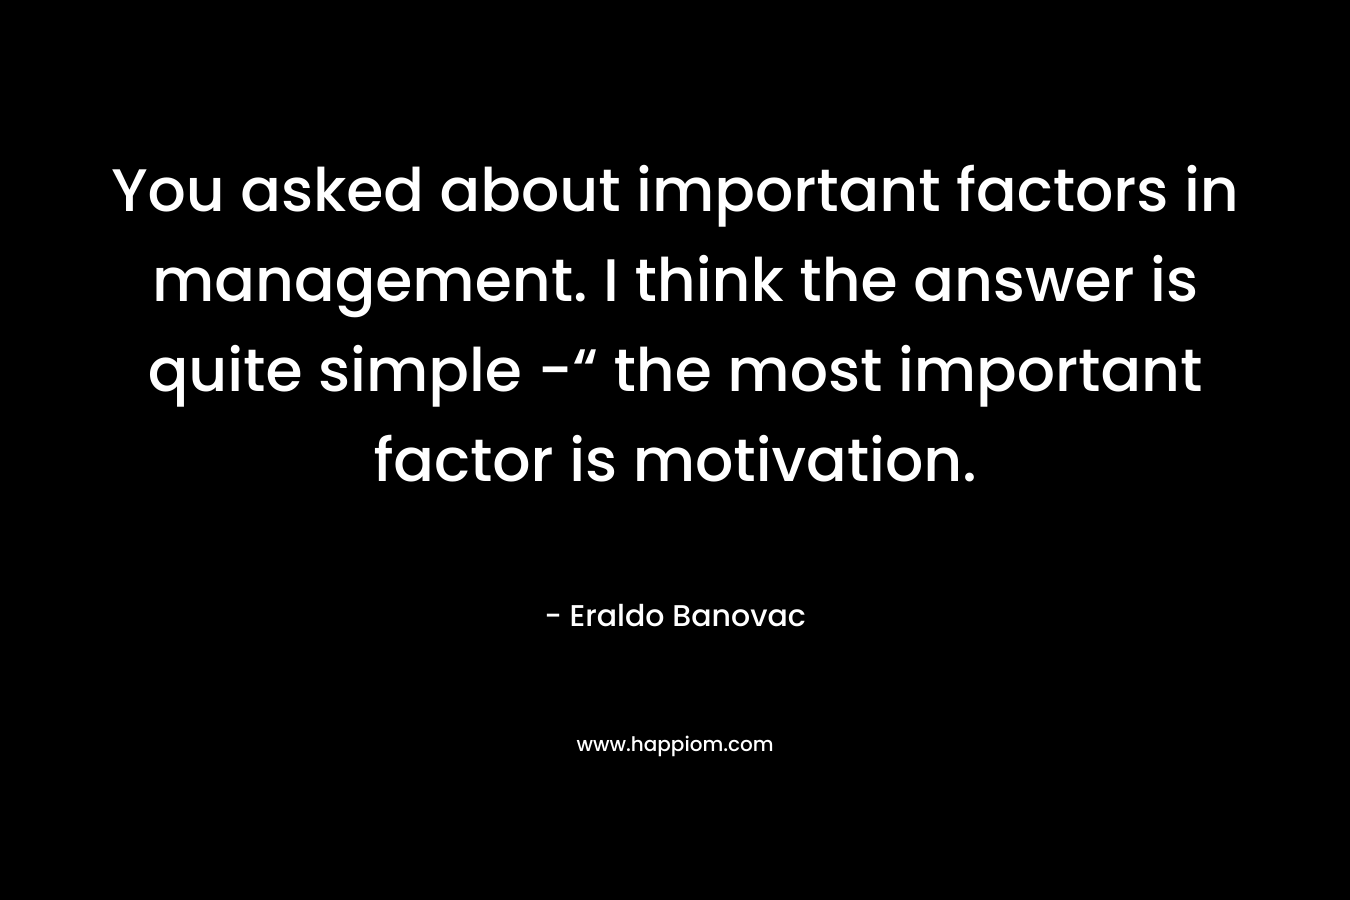 You asked about important factors in management. I think the answer is quite simple -“ the most important factor is motivation.